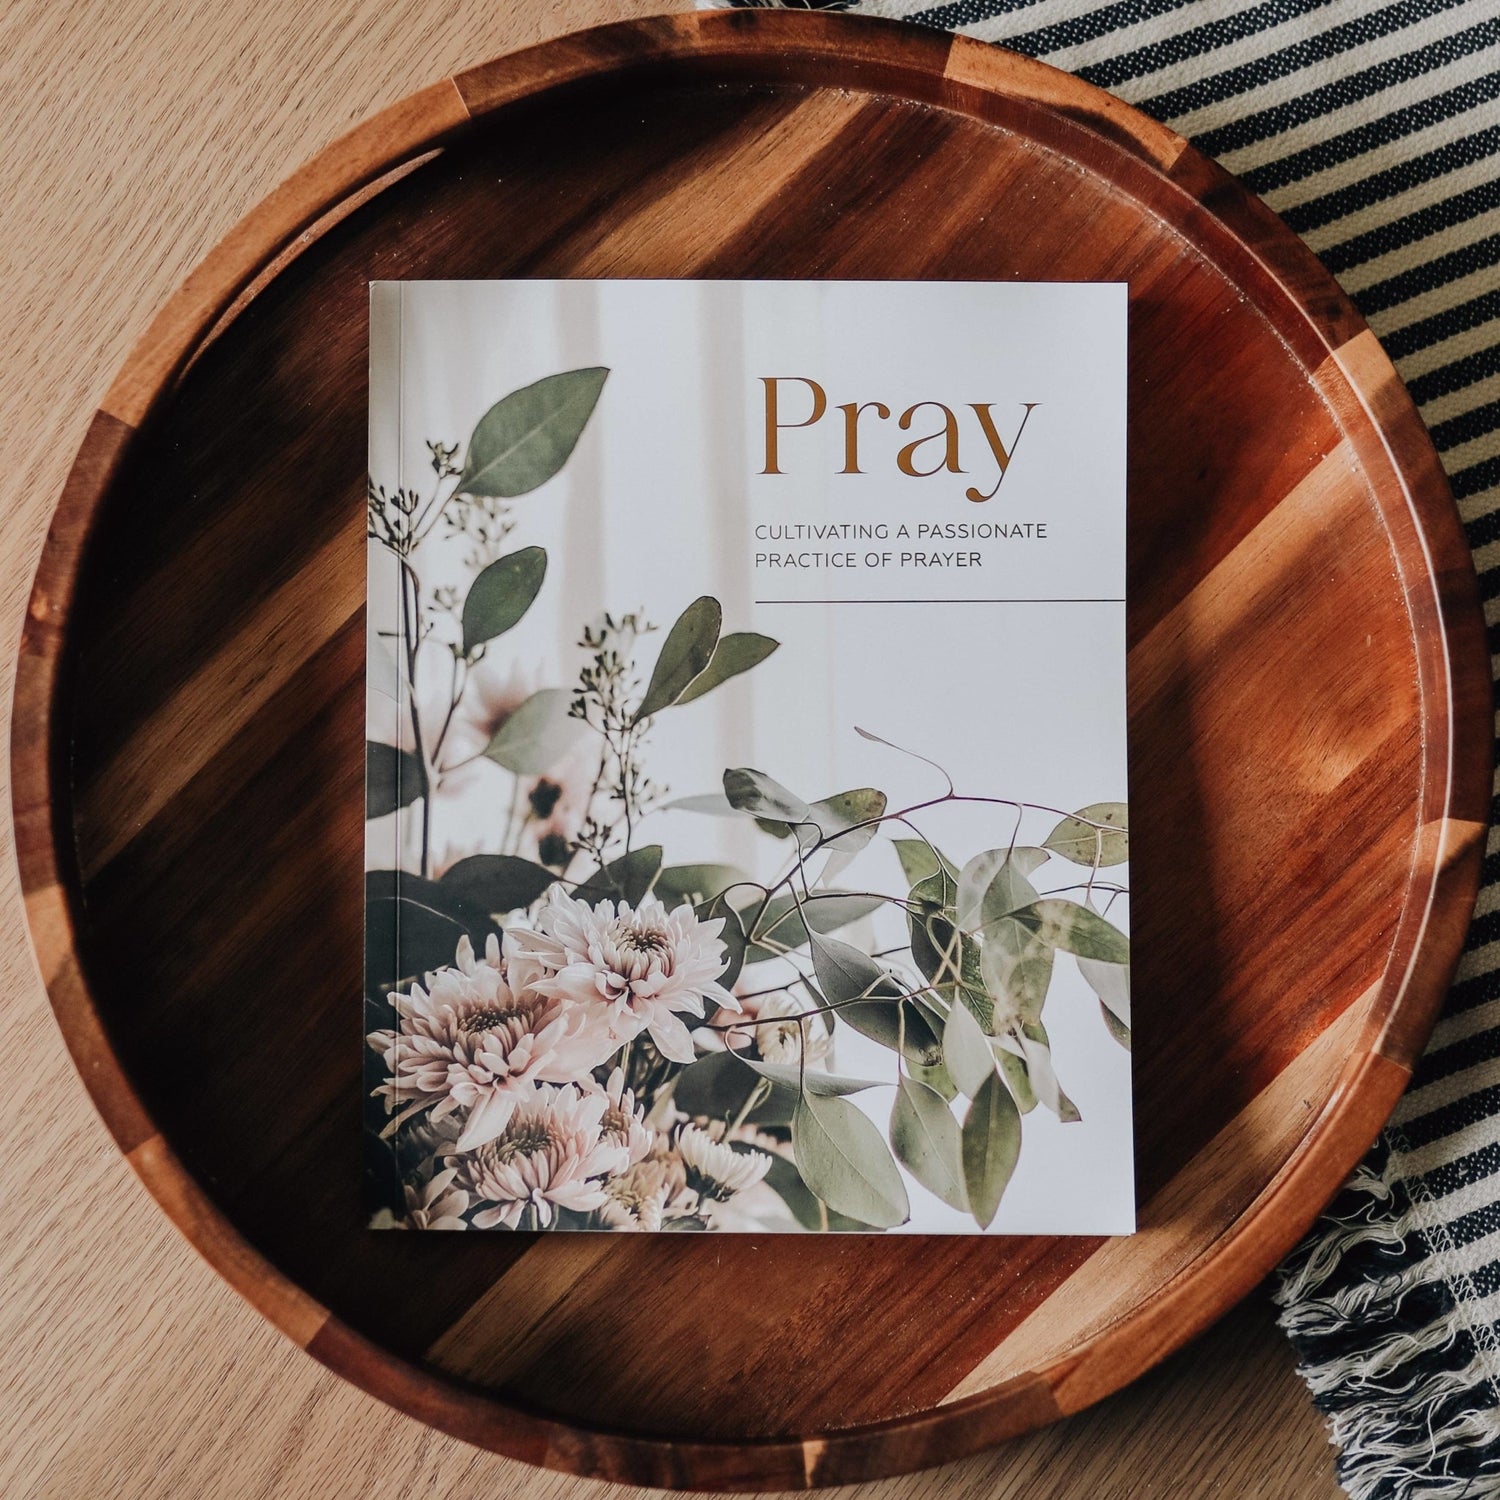 The Daily Grace Co - Pray | Cultivating a Passionate Practice of Prayer - Gaines Jewelers